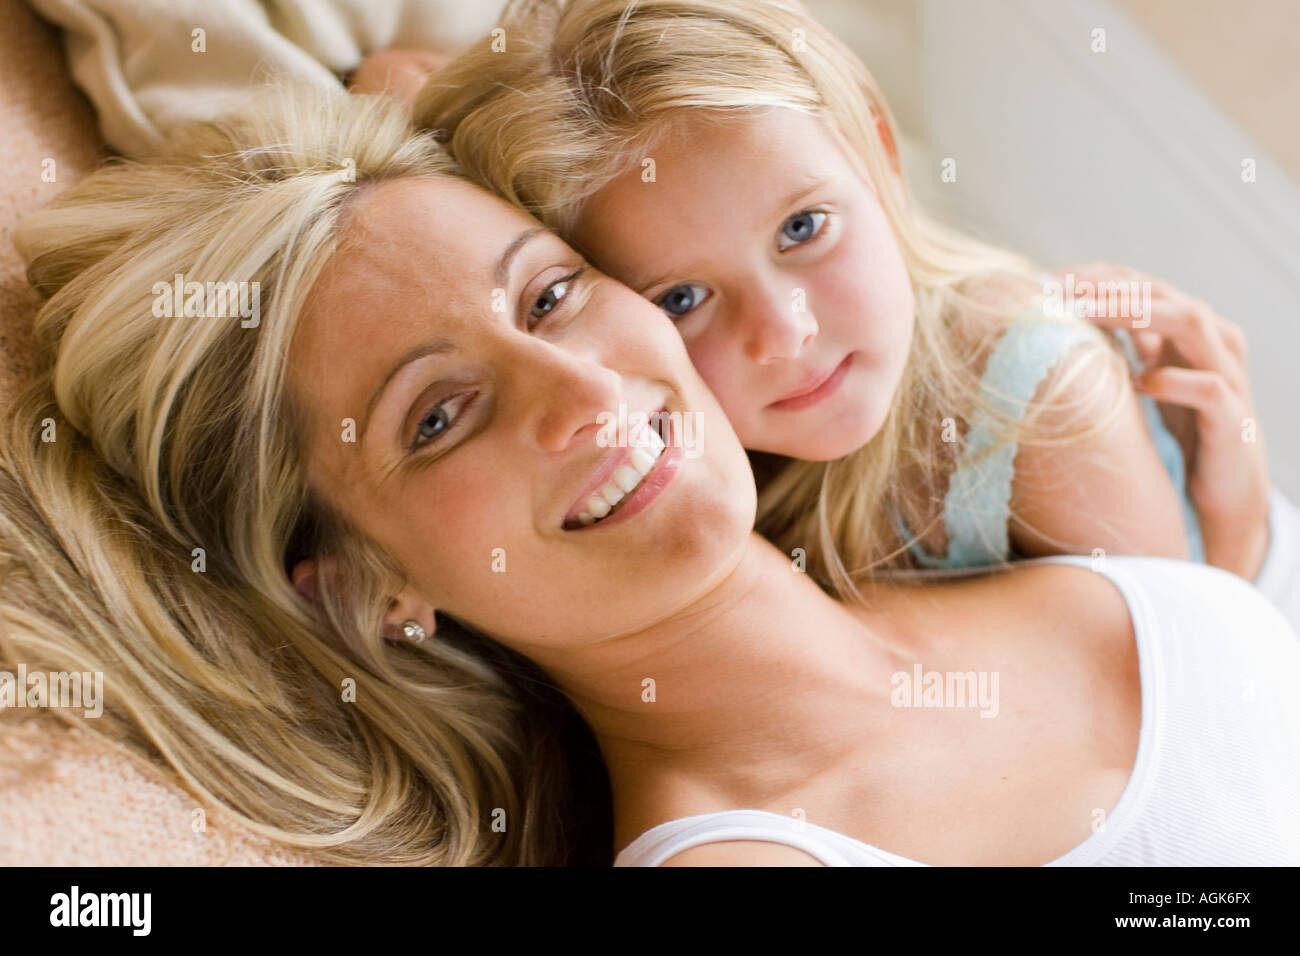 portrait of mother and daughter Stock Photo